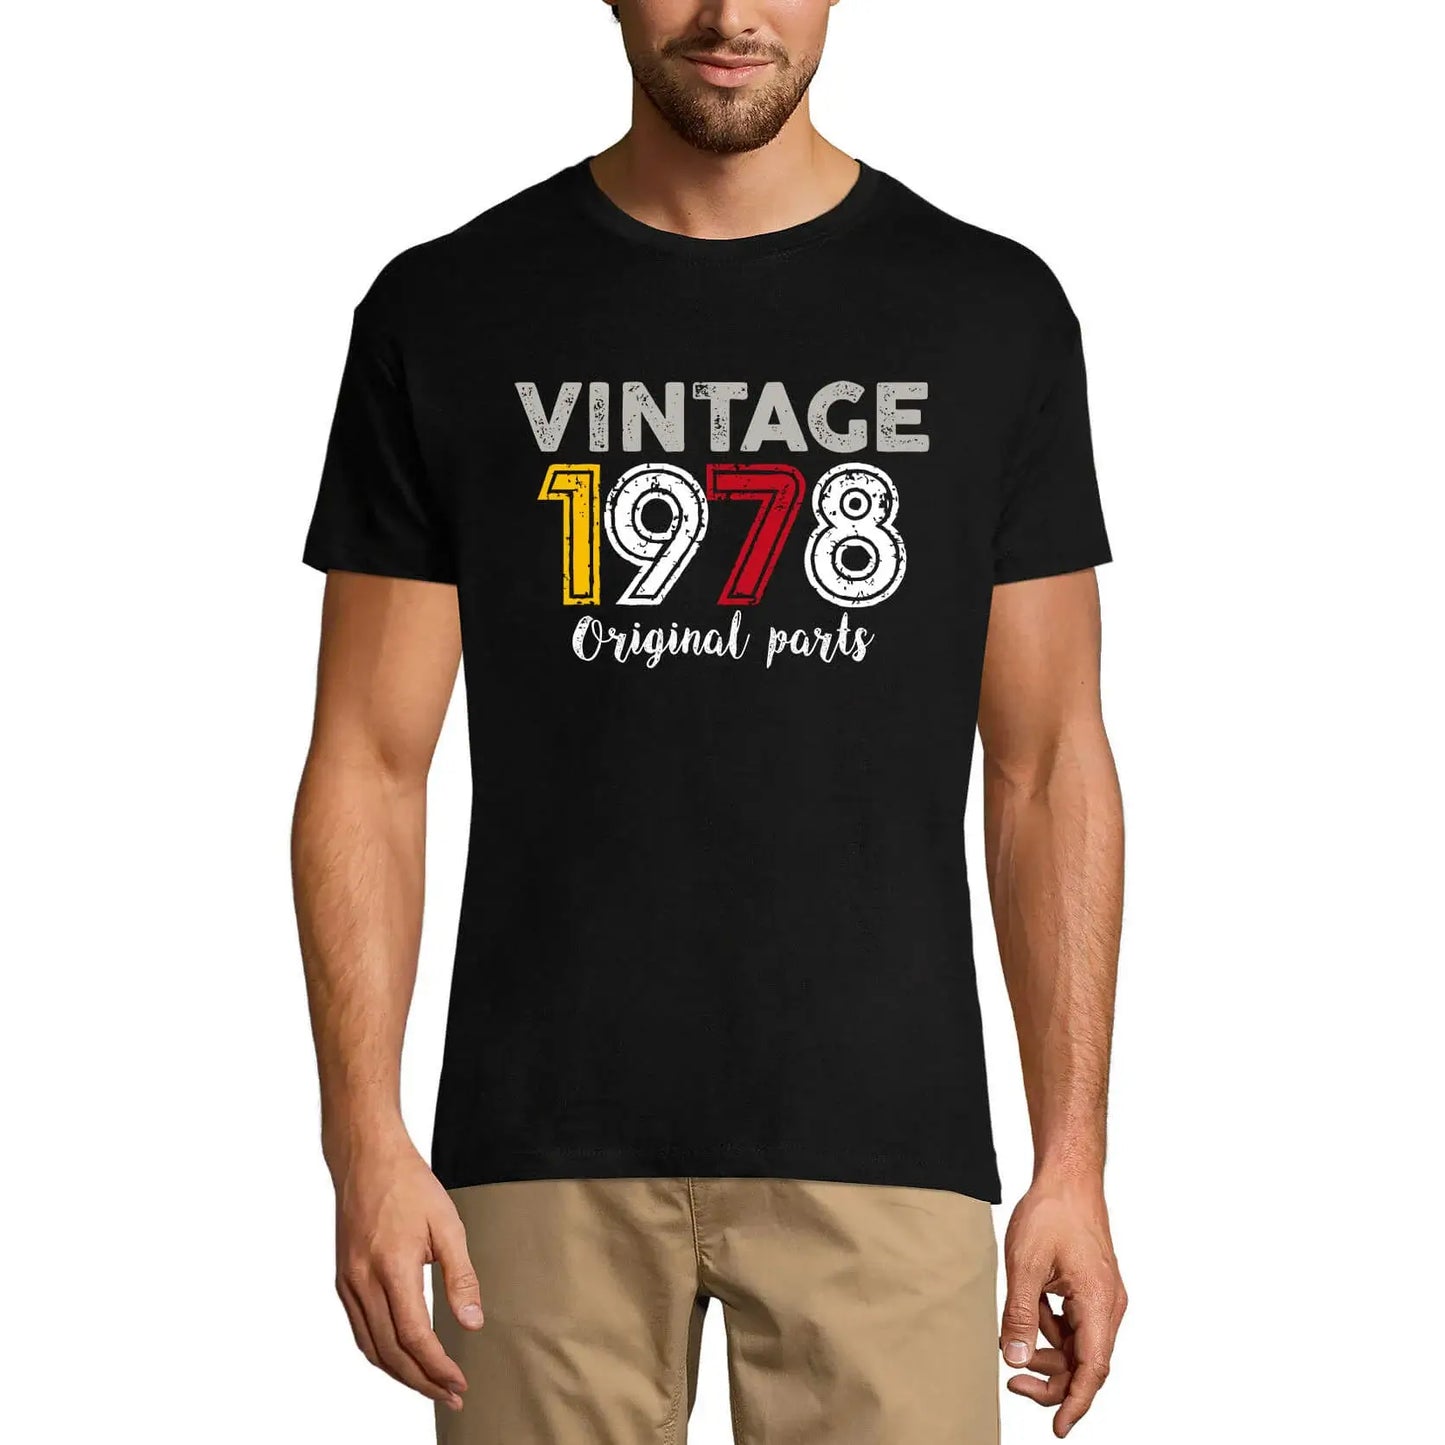 Men's Graphic T-Shirt Original Parts 1978 46th Birthday Anniversary 46 Year Old Gift 1978 Vintage Eco-Friendly Short Sleeve Novelty Tee